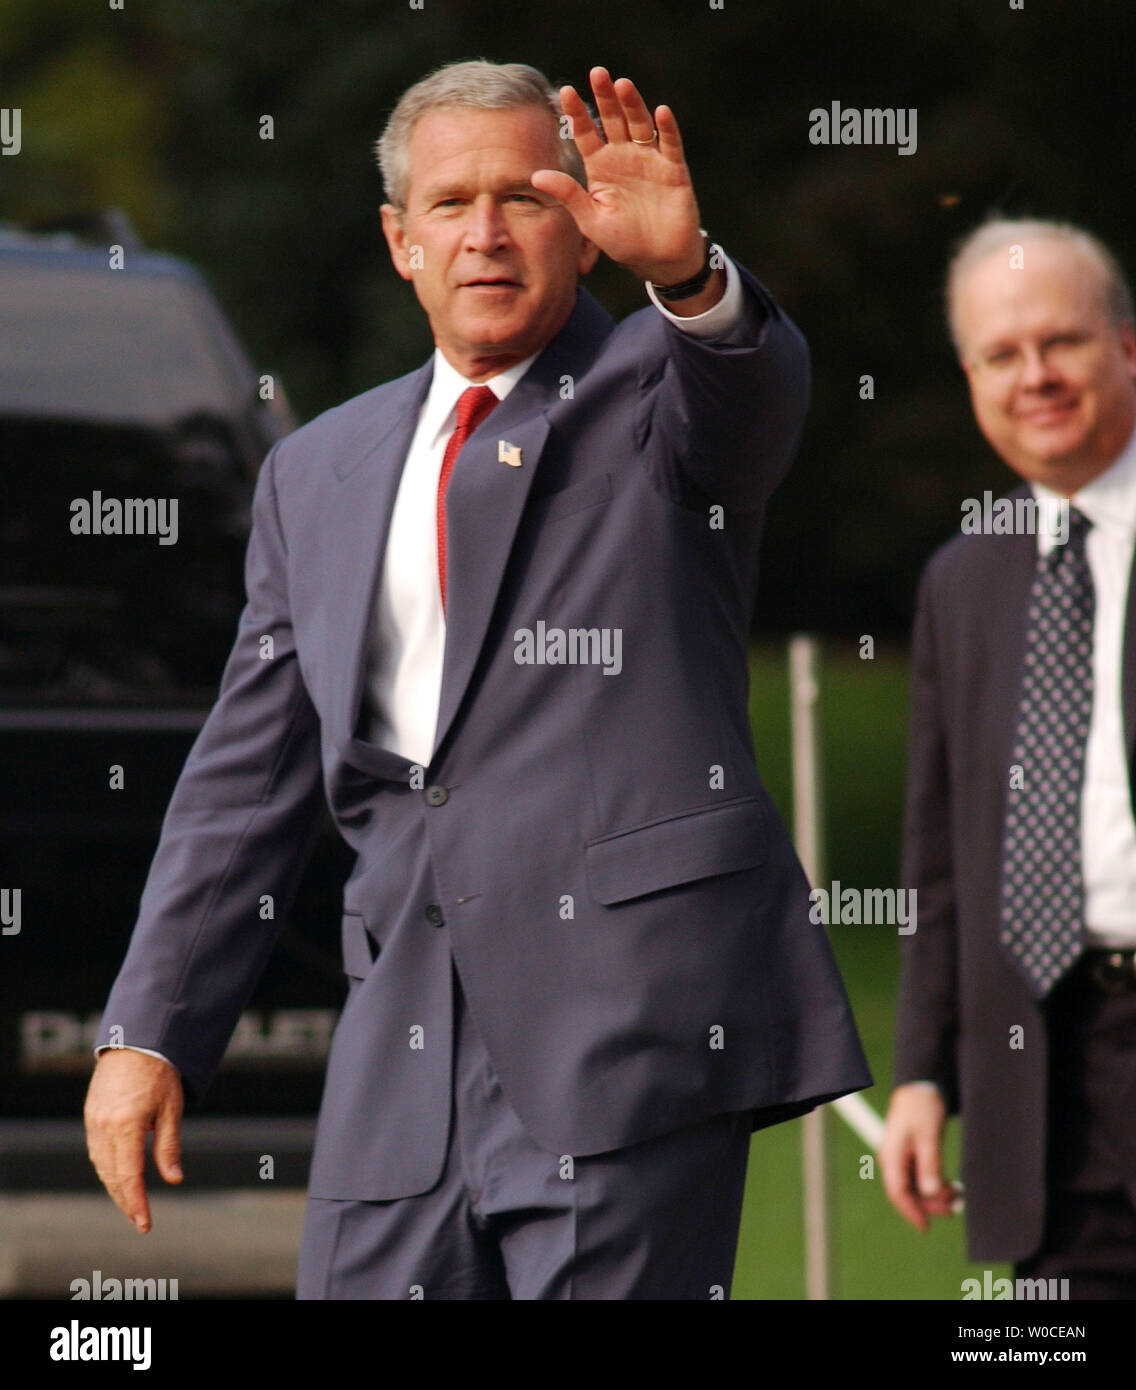 President George W. Bush waves to the press while walking across the South Lawn of the White House on August 10, 2004 in Washington.  Bush had just announced that he is nominating Rep. Porter Goss, R-FL, as the new head of the CIA. Goss is a former member of the CIA and sits on the House of Representatives Intelligence Committee. (UPI Photo/Michael Kleinfeld) Stock Photo